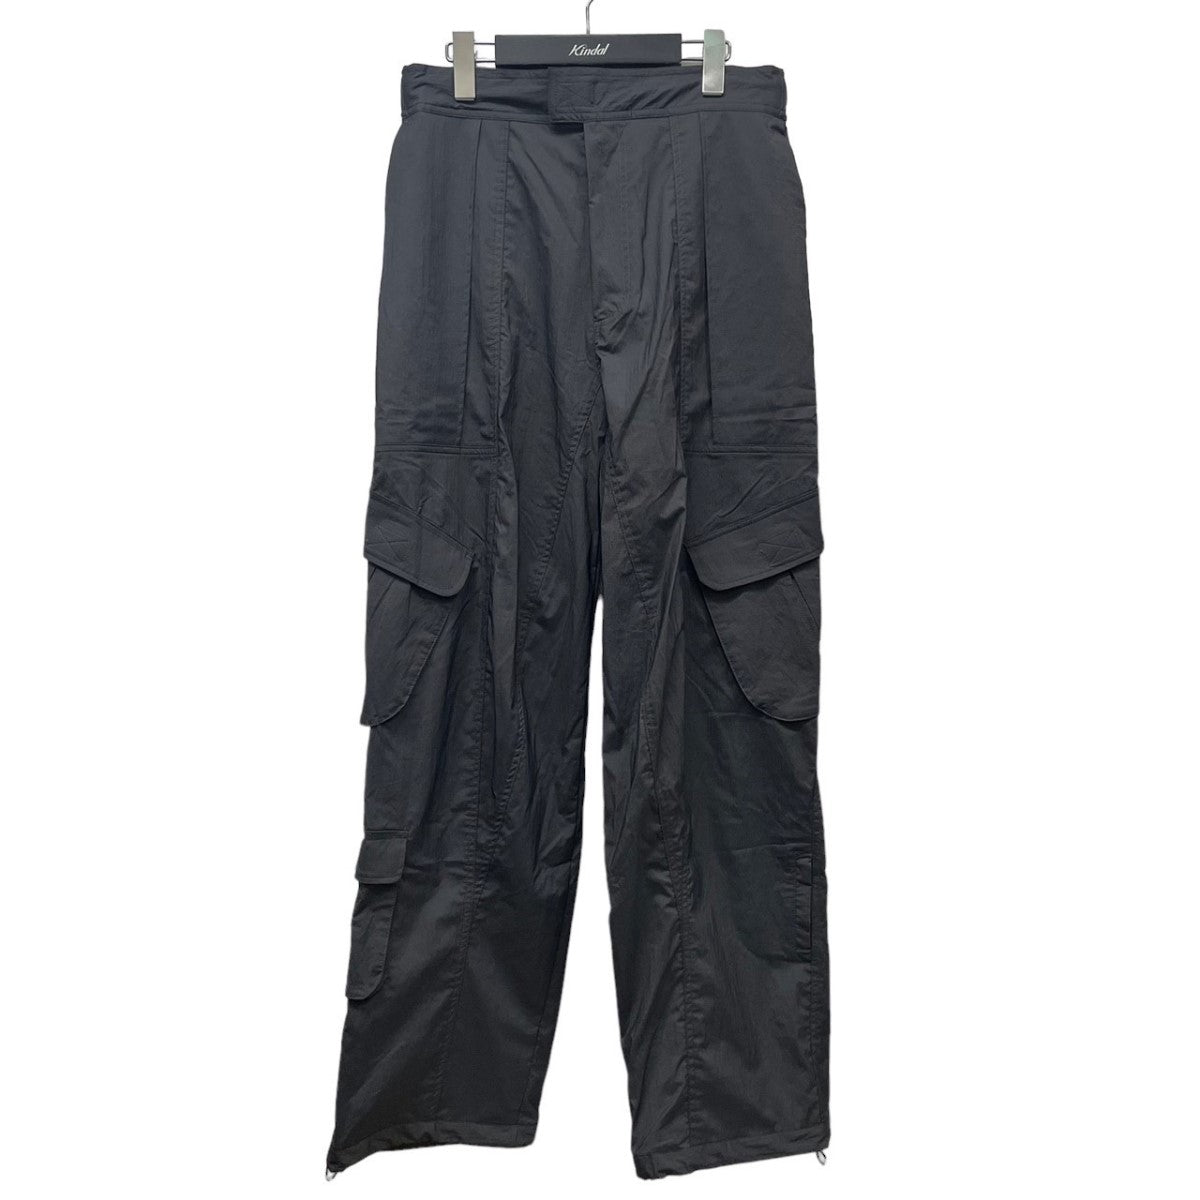 ONE FIFTH(ワンフィフス) 「TACTICAL TROUSERS」 ナイロンカーゴパンツ ...